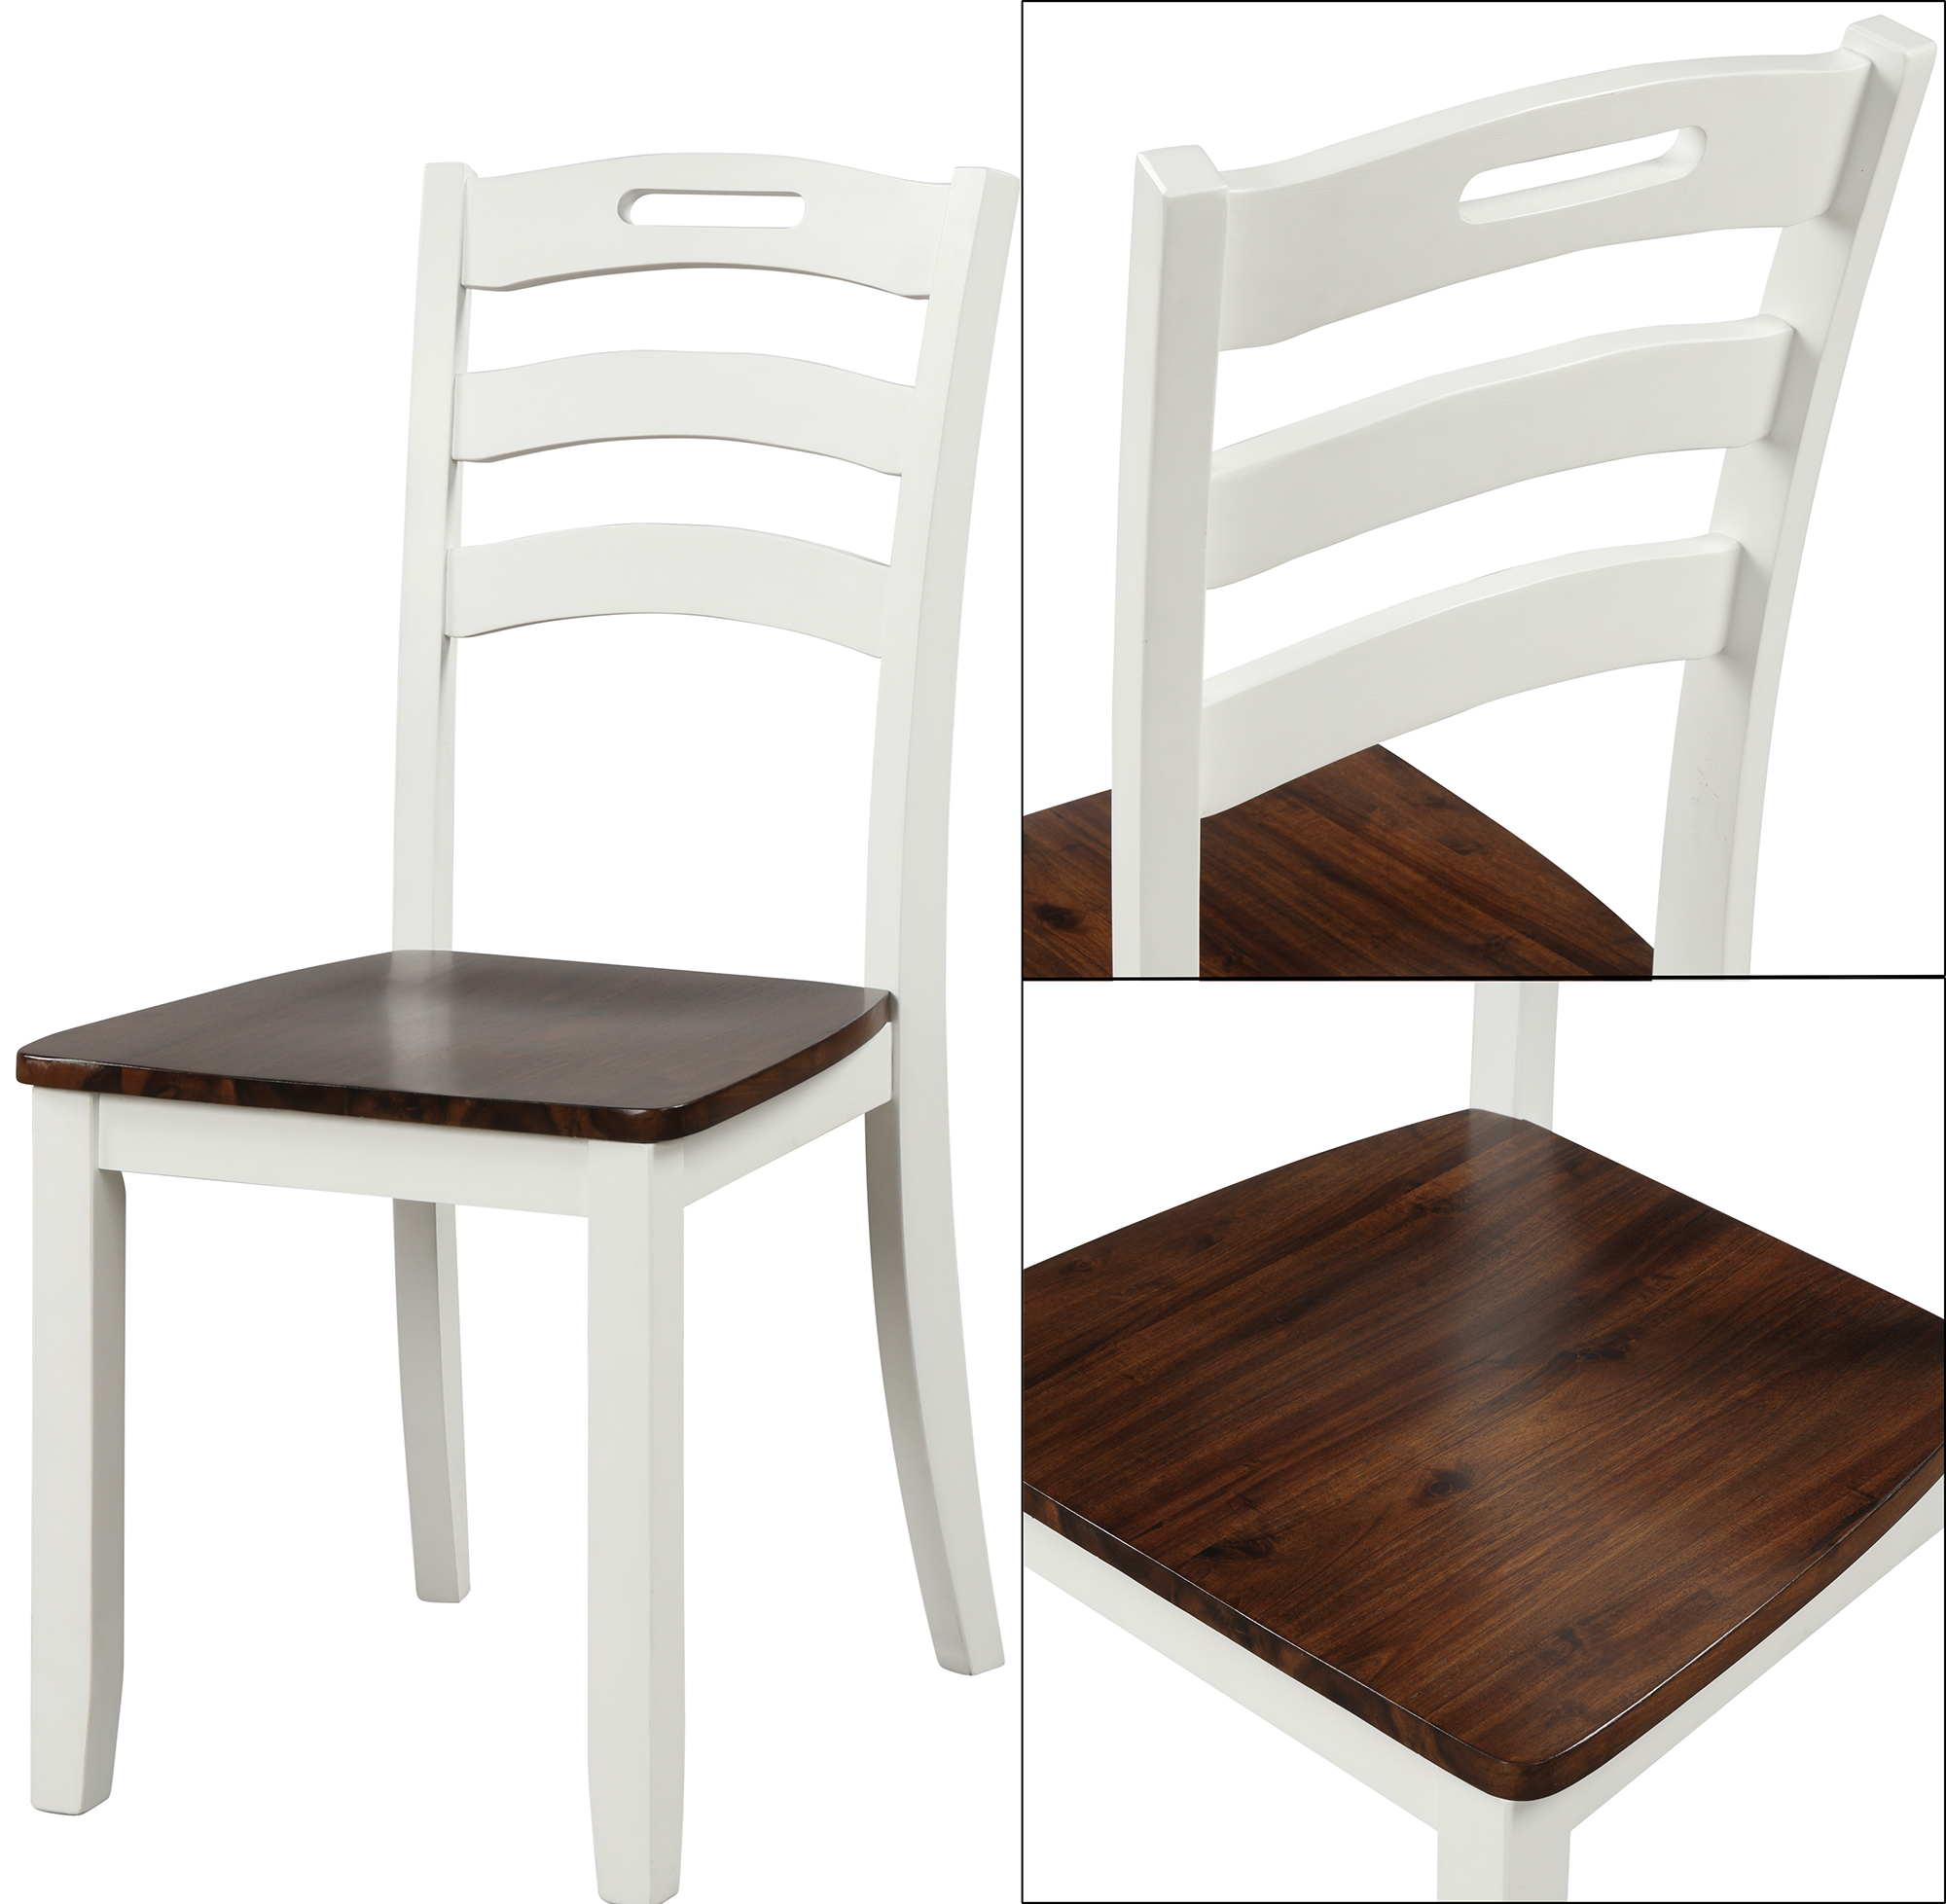 6 Piece Dining Table Set With Bench, Table Set - SH000119AAK